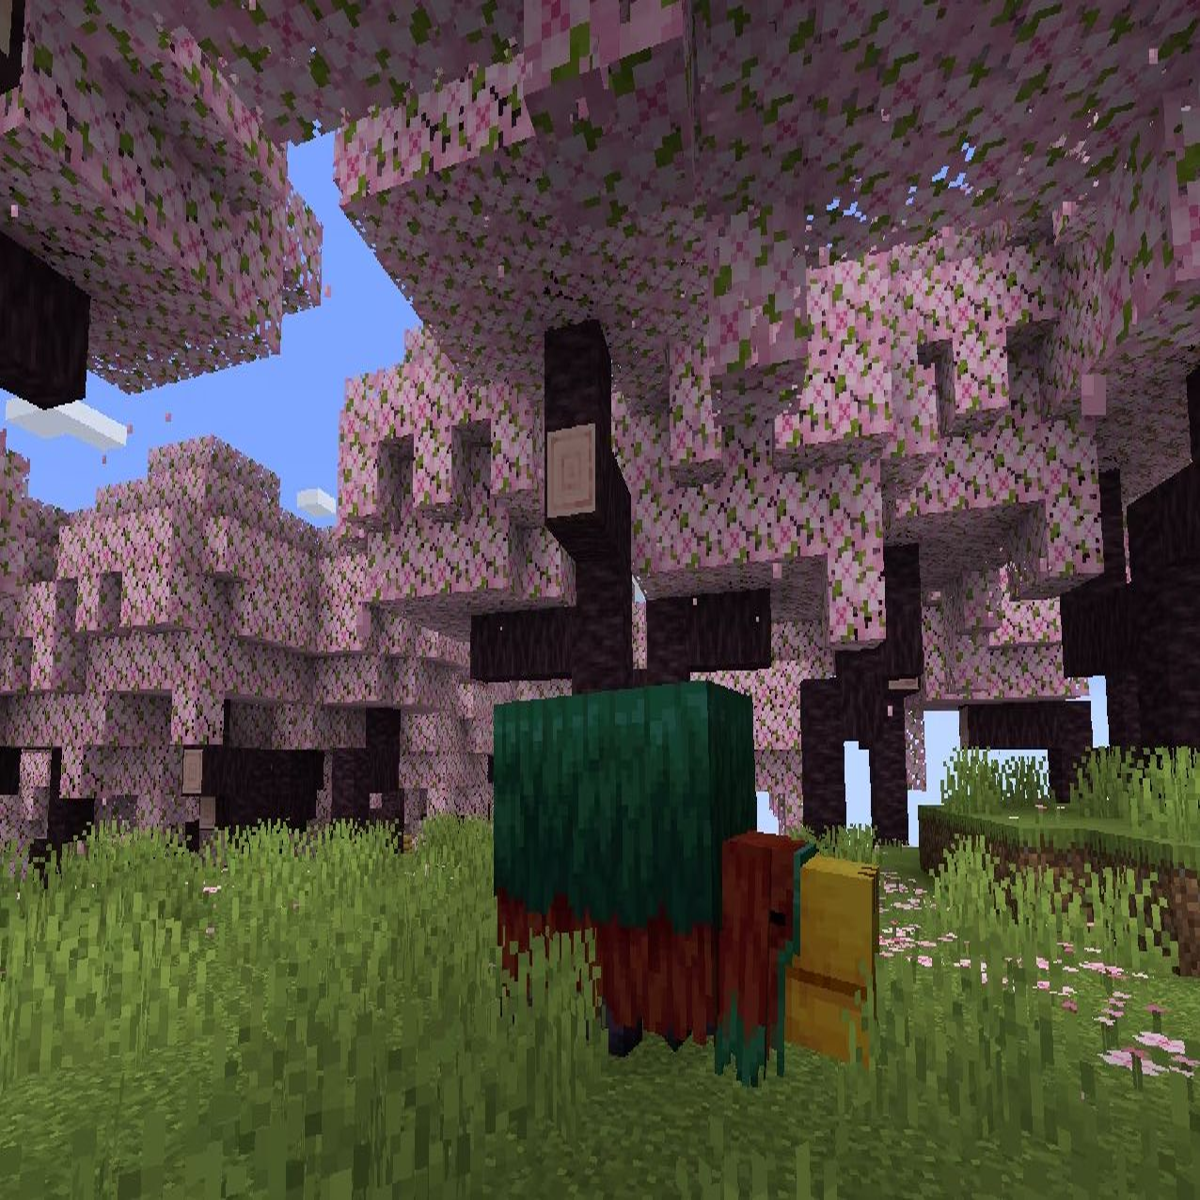 Minecraft players suspect ducks to be a mob candidate for Mob Vote 2023